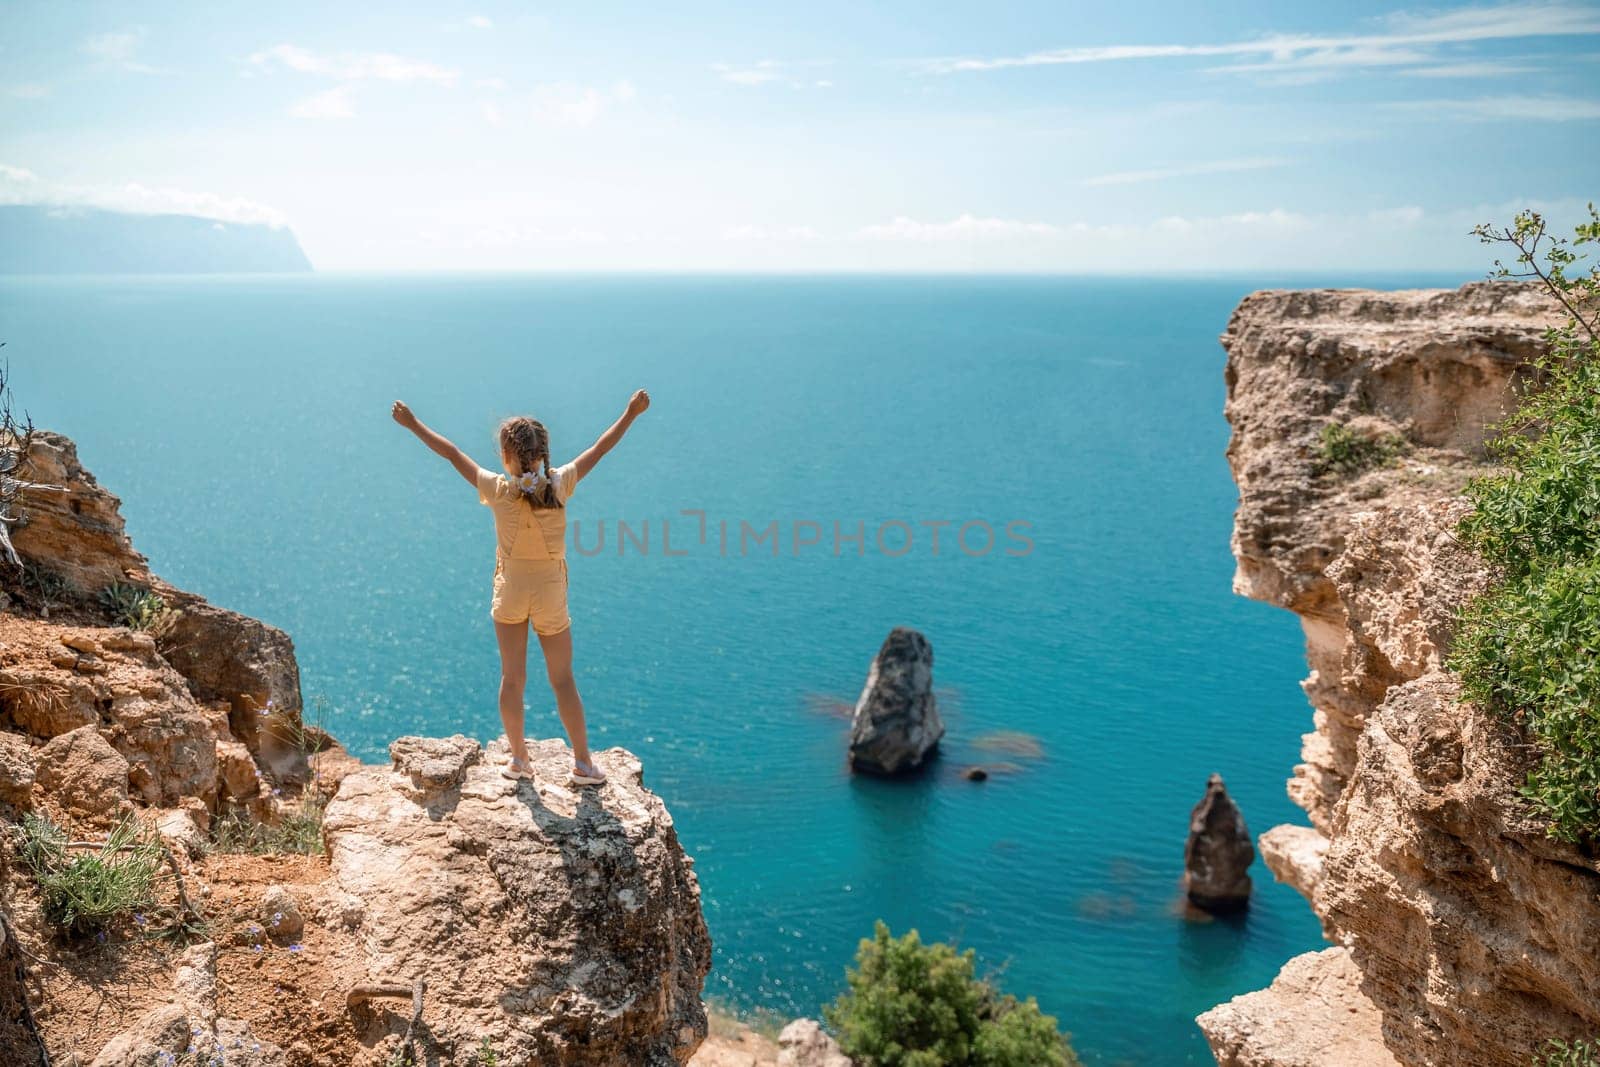 Happy girl stands on a rock high above the sea, wearing a yellow jumpsuit and sporting braided hair, depicting the idea of a summer vacation by the sea